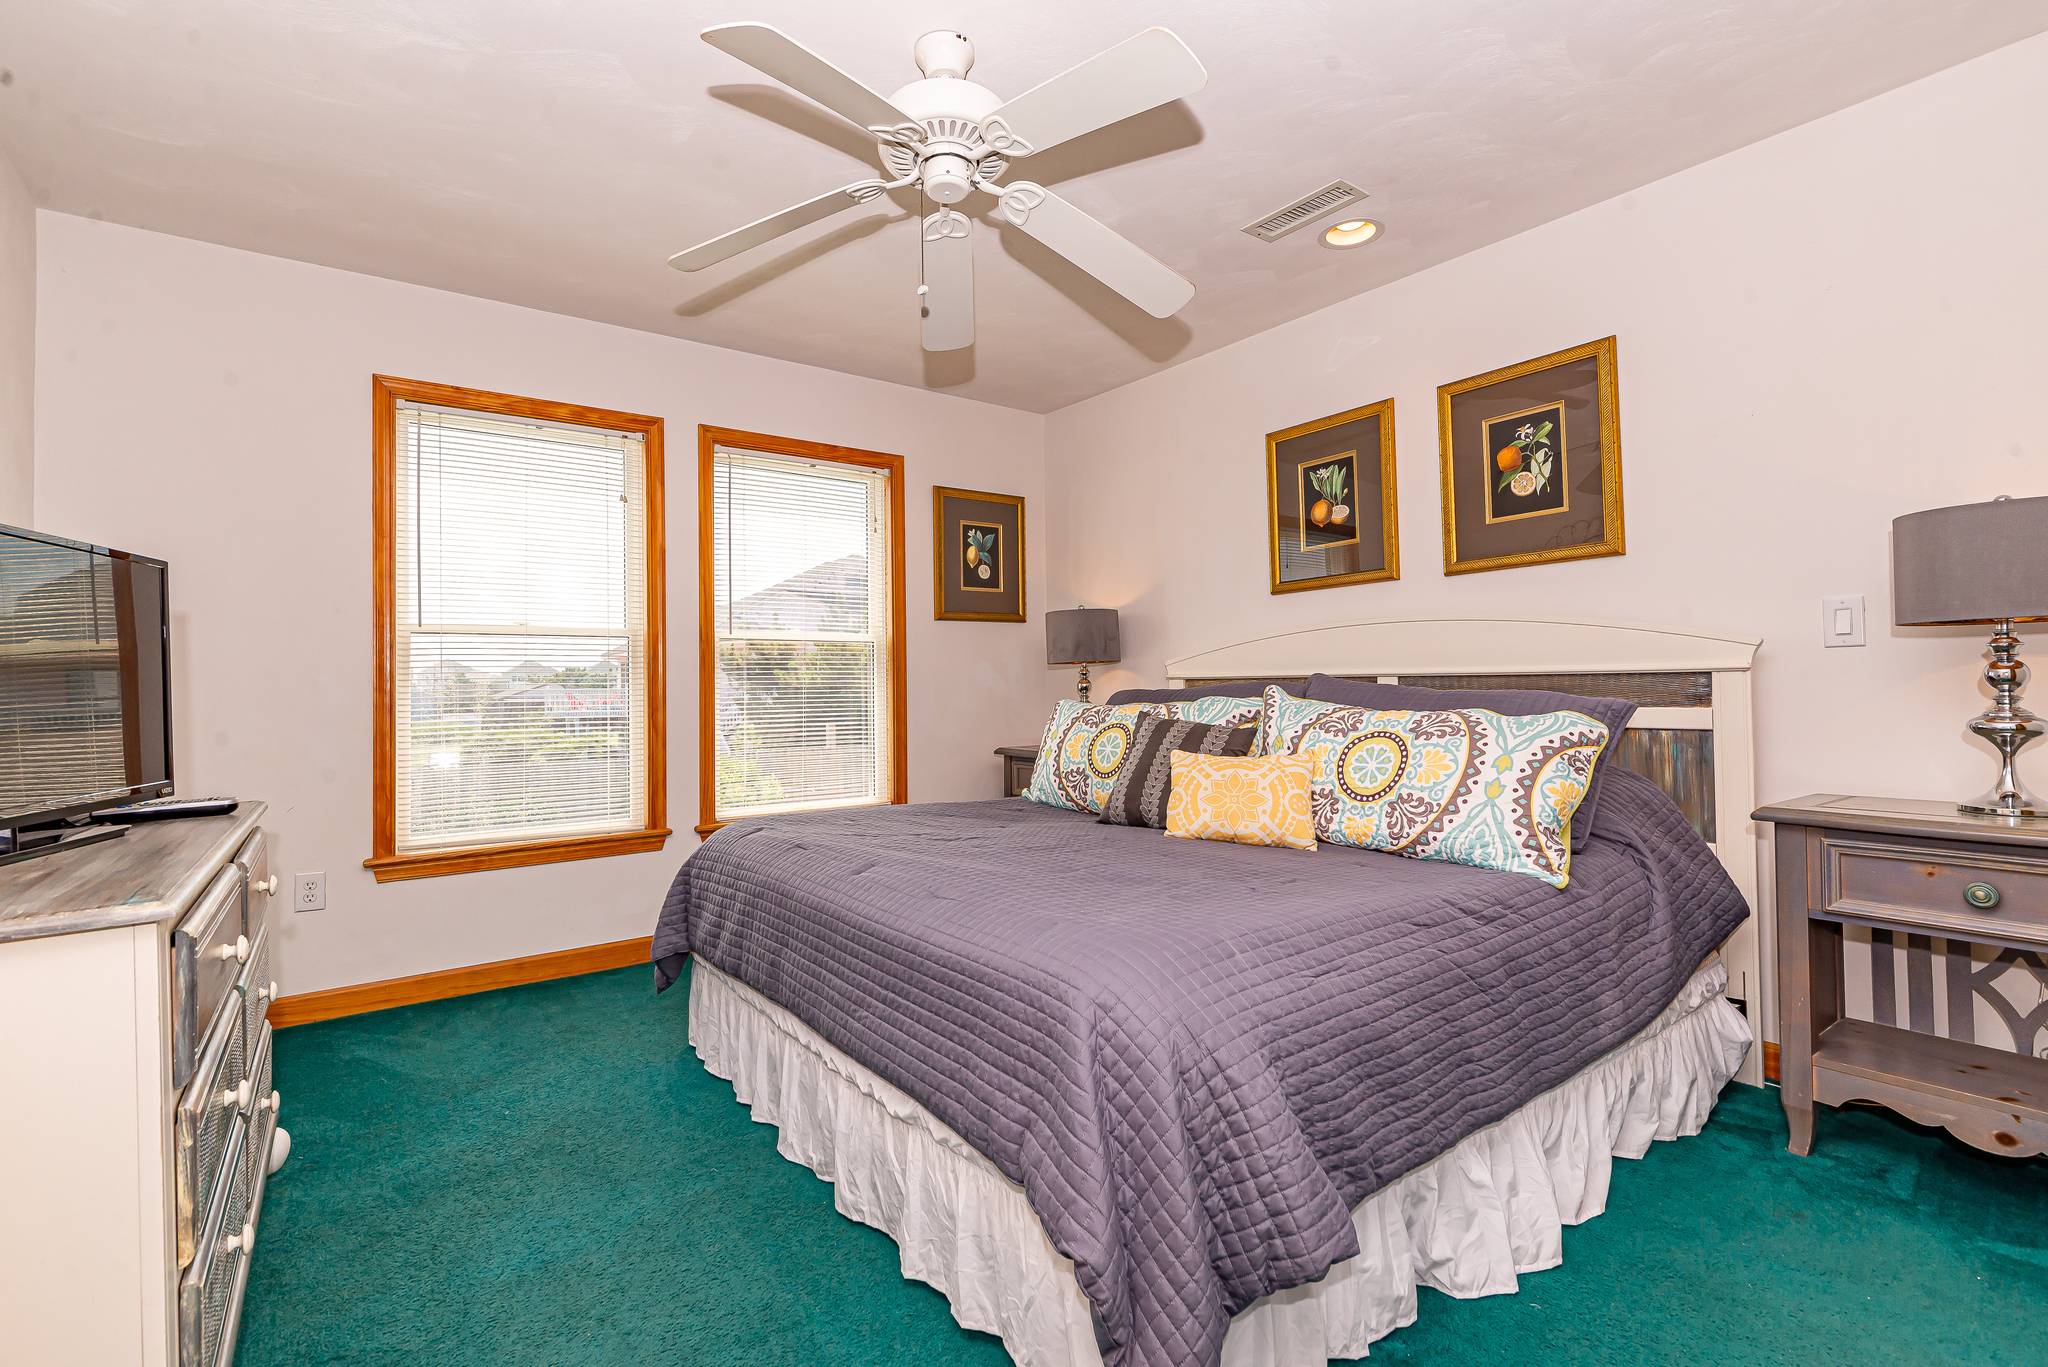 Sunny Delight | Semi-Oceanfront OBX Vacation Rental